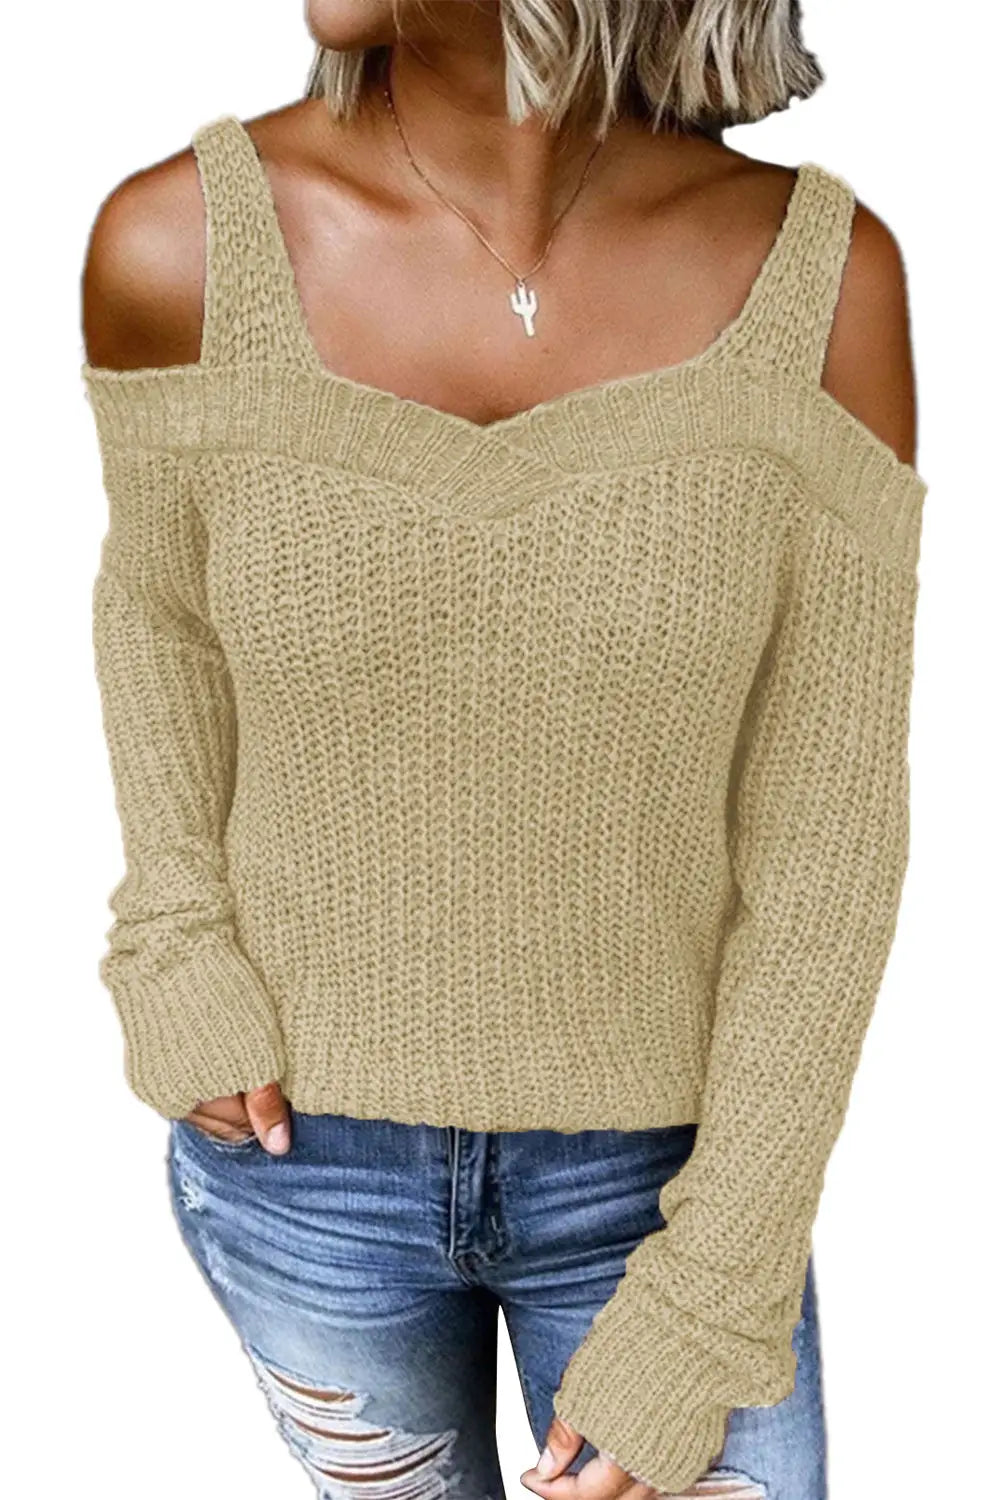 White dew shoulder knitted sweater - sweaters & cardigans